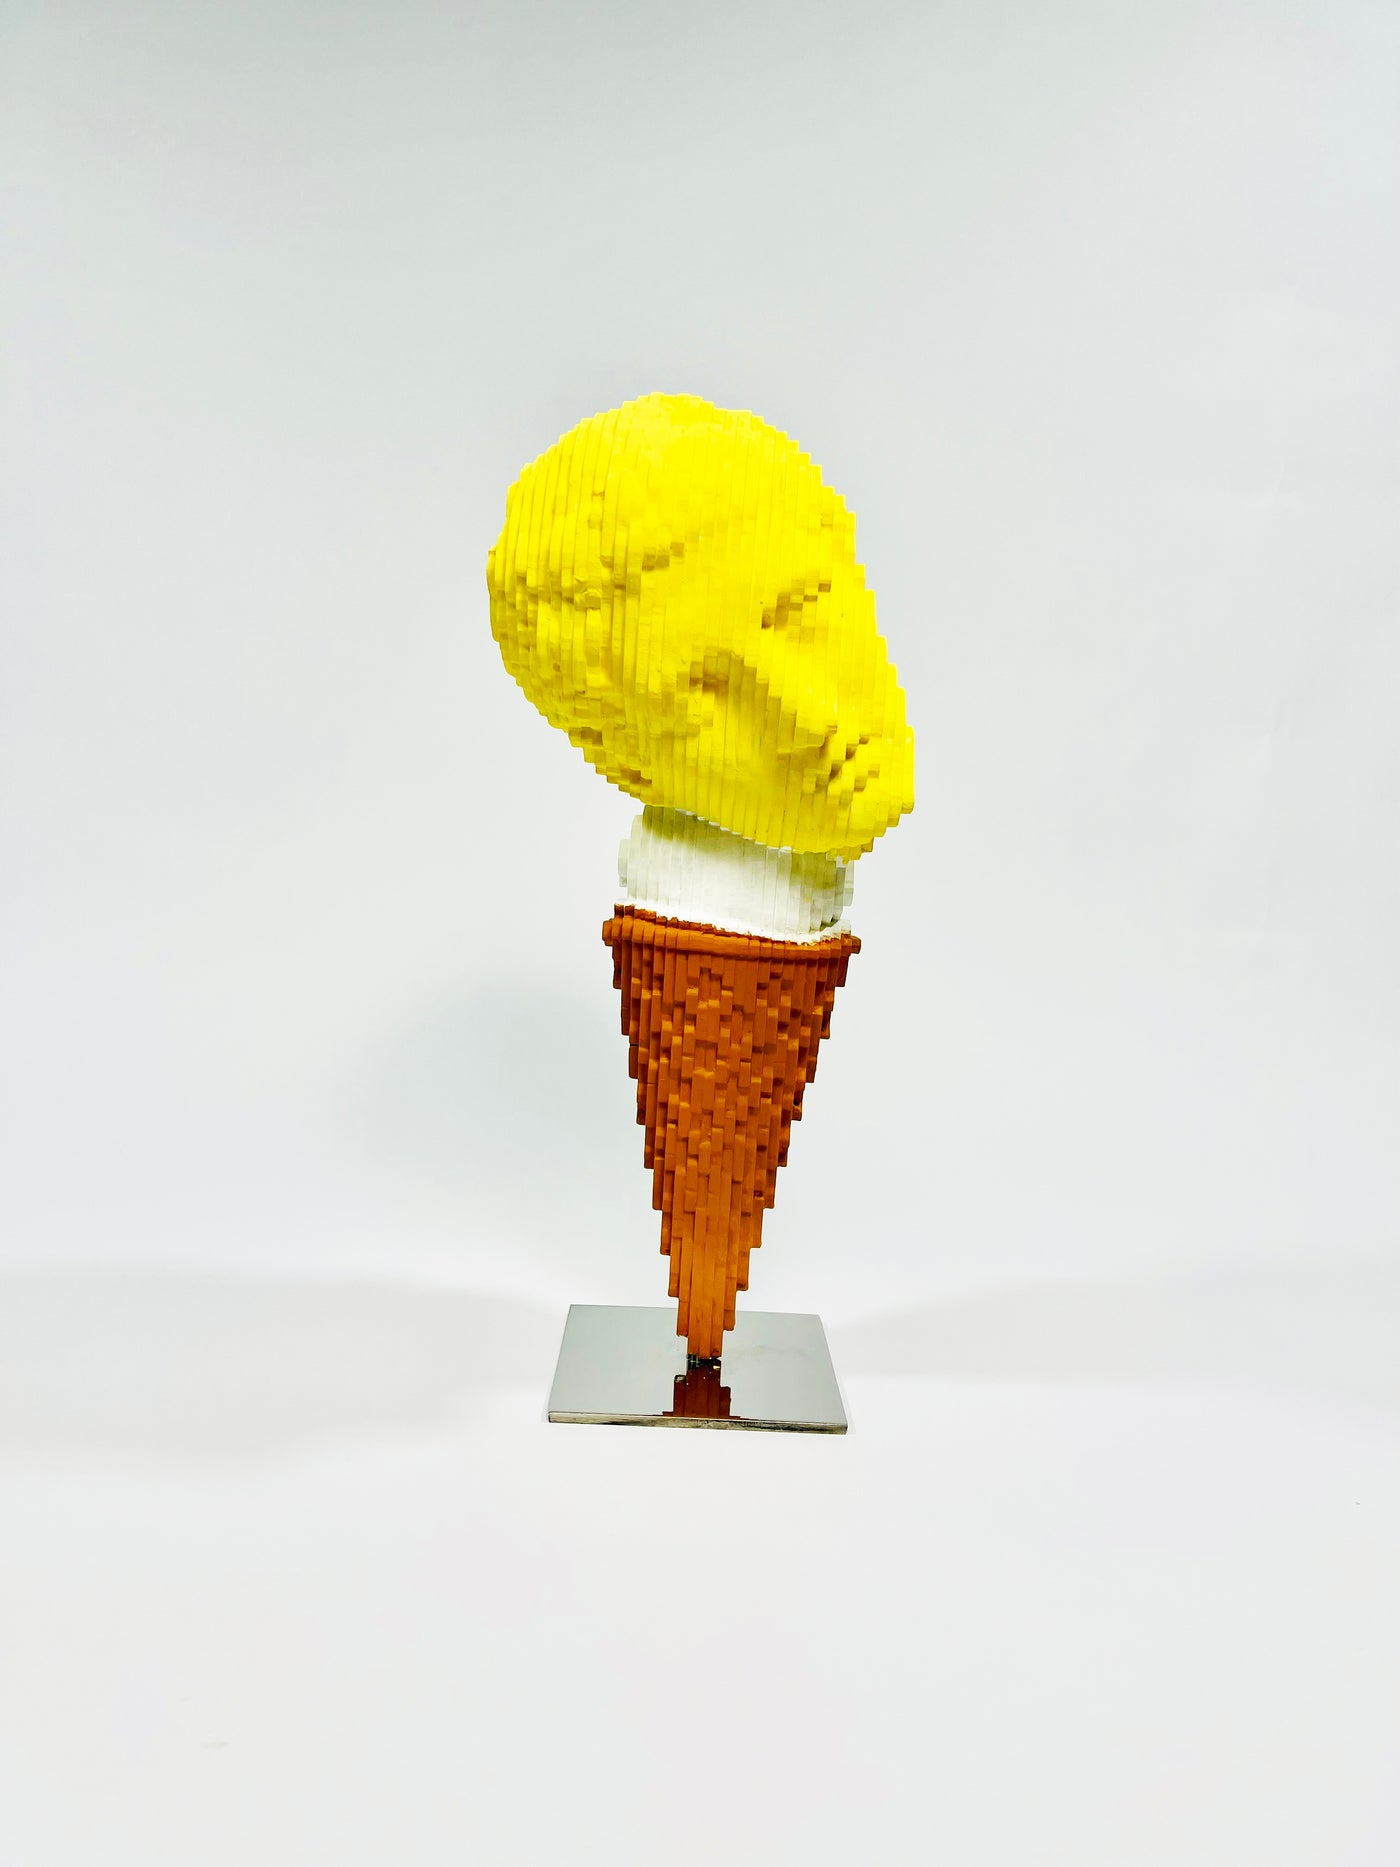 Thologiny (Ice Cream Lemon and Cream)) by Daniele Fortuna - 2023 - Unique wood sculpture - 13x6.3x6.3 in